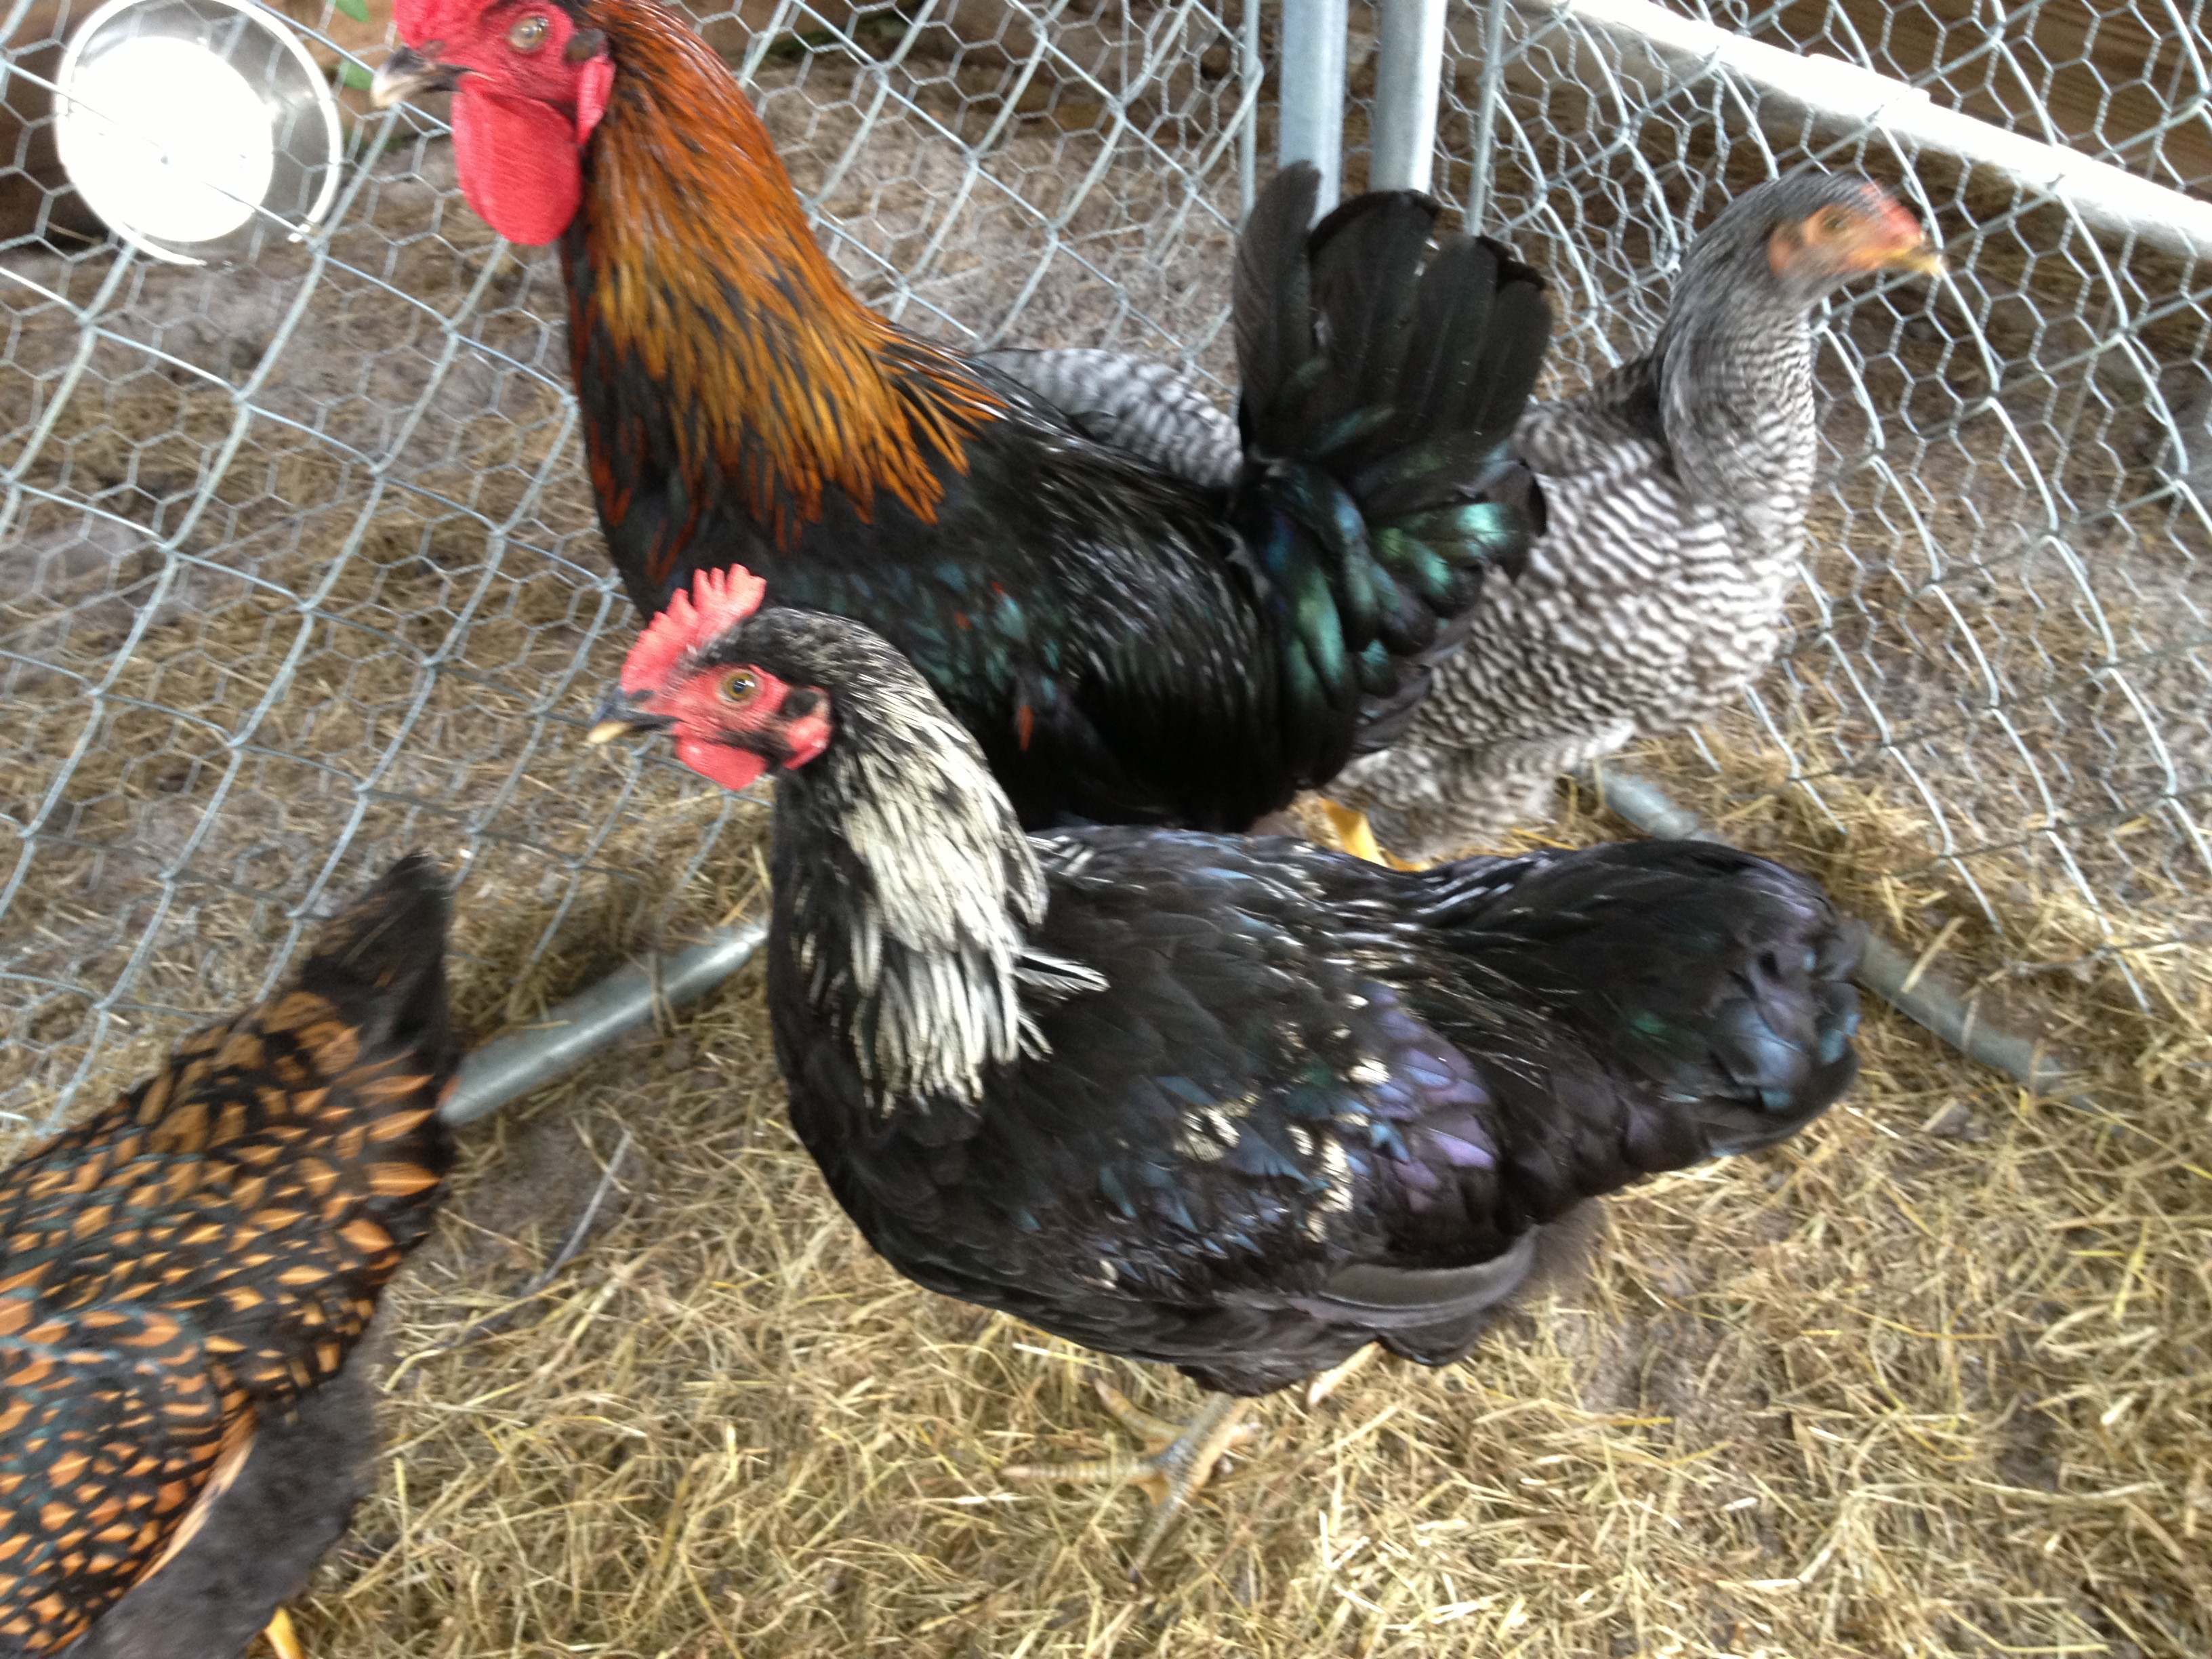 PLEASE HELP IDENTIFY BREED OF ROOSTERS.  I HATCHED 4 EGGS.  COOPER MORAN AND PLYMOUTH BARRED ROCK BLUEBELL LINE.  PRETTY SURE 2-HENS AND 2-ROOSTERS HATCHED.  THANKS FOR YOUR HELP!